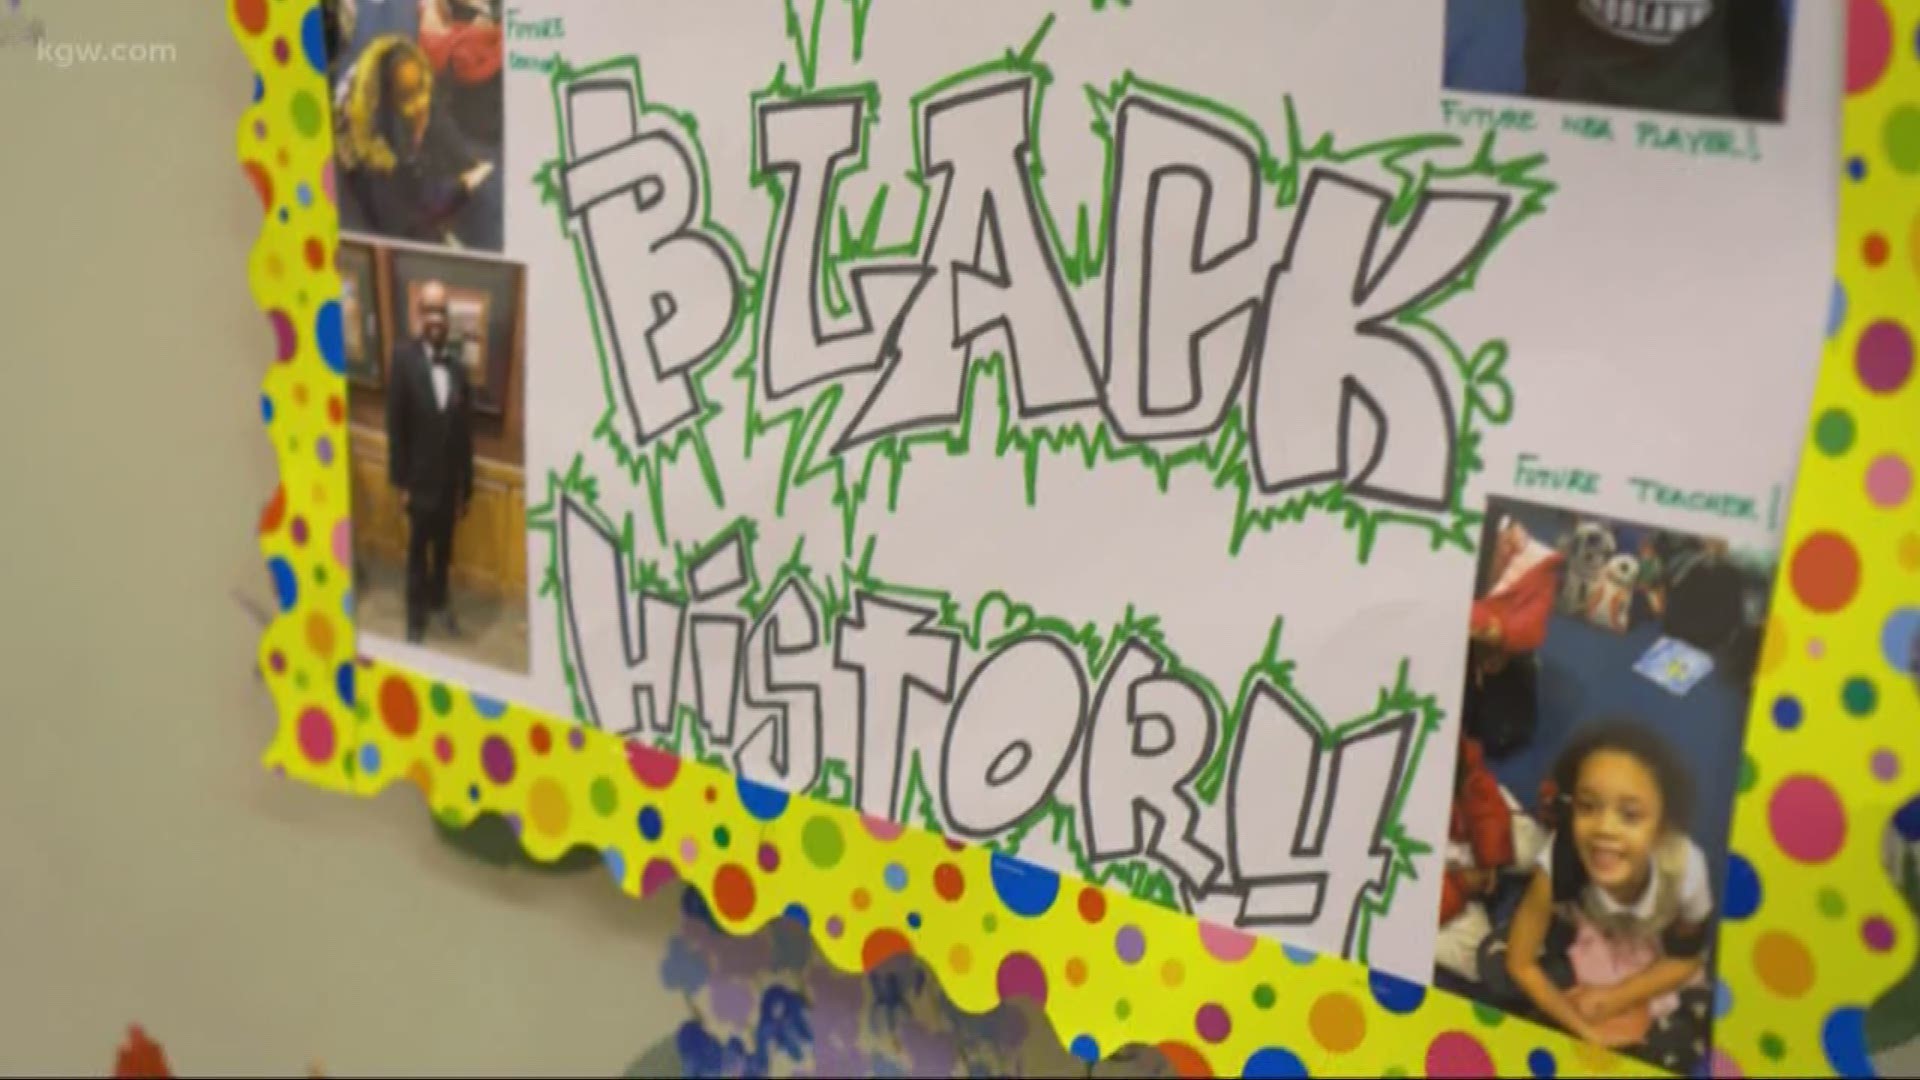 Students and teachers at Woodlawn Elementary School are reflecting on what Black History month means to them.